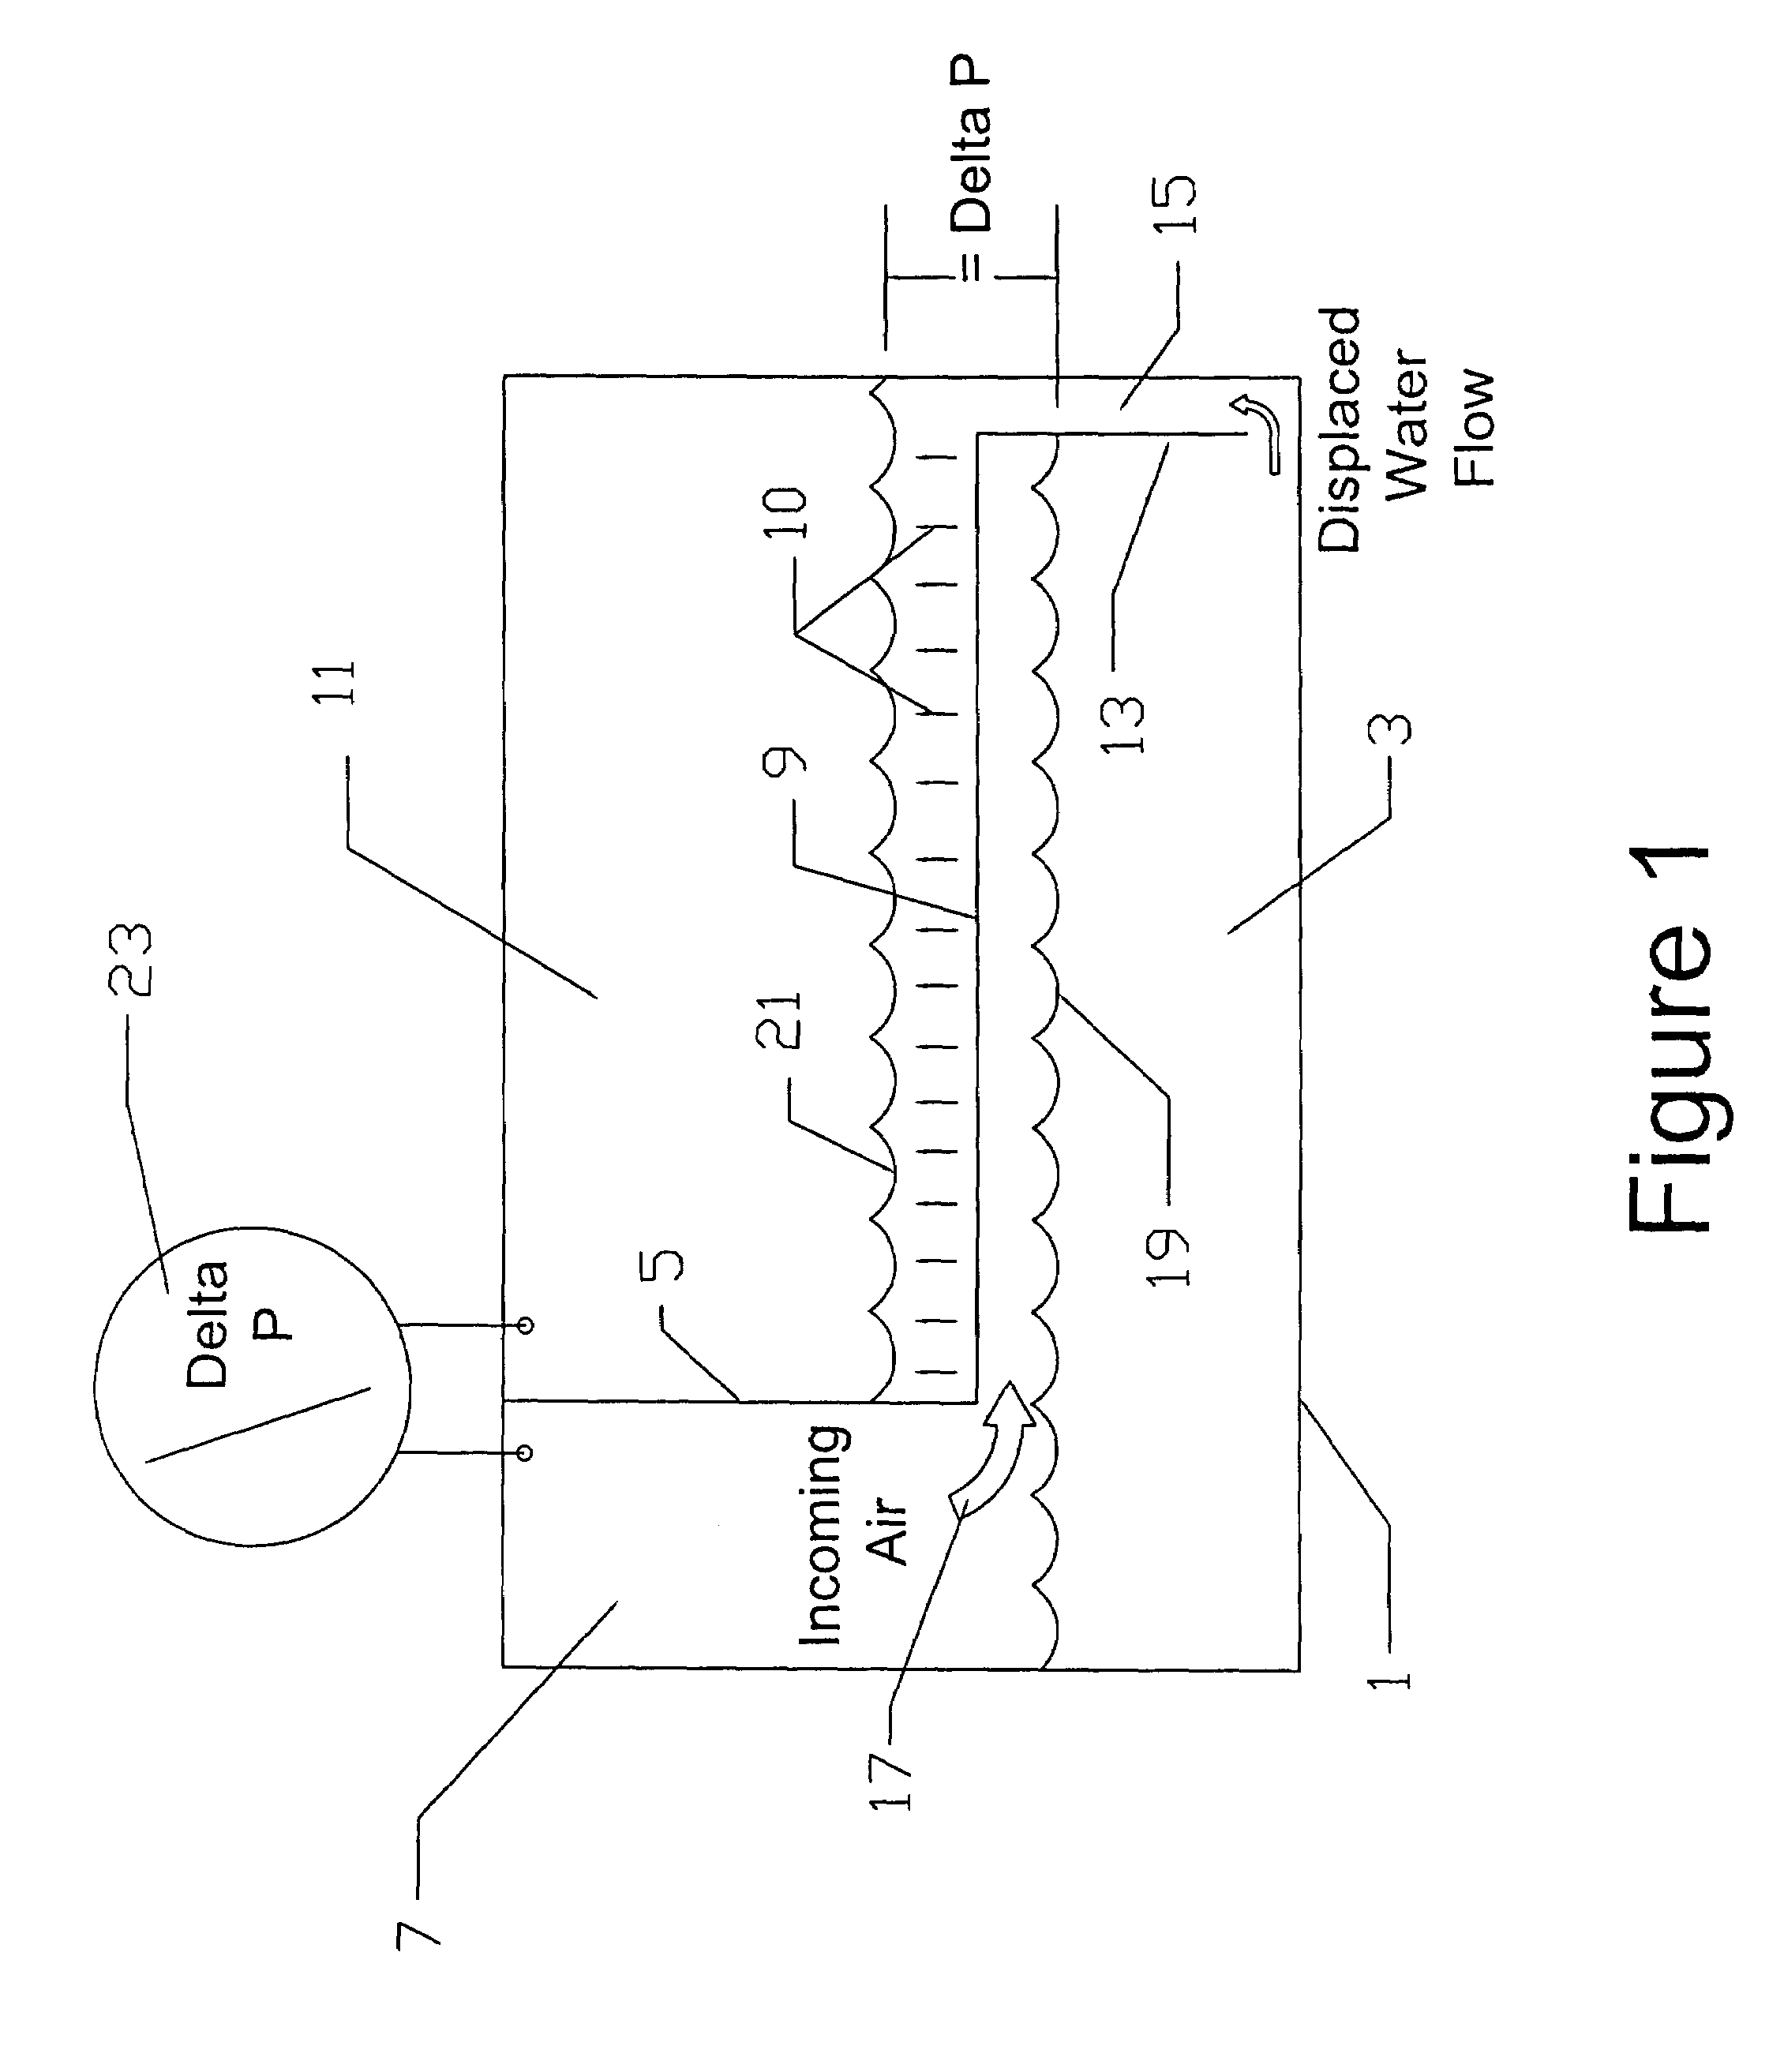 Apparatus for removing particulates from a gas stream